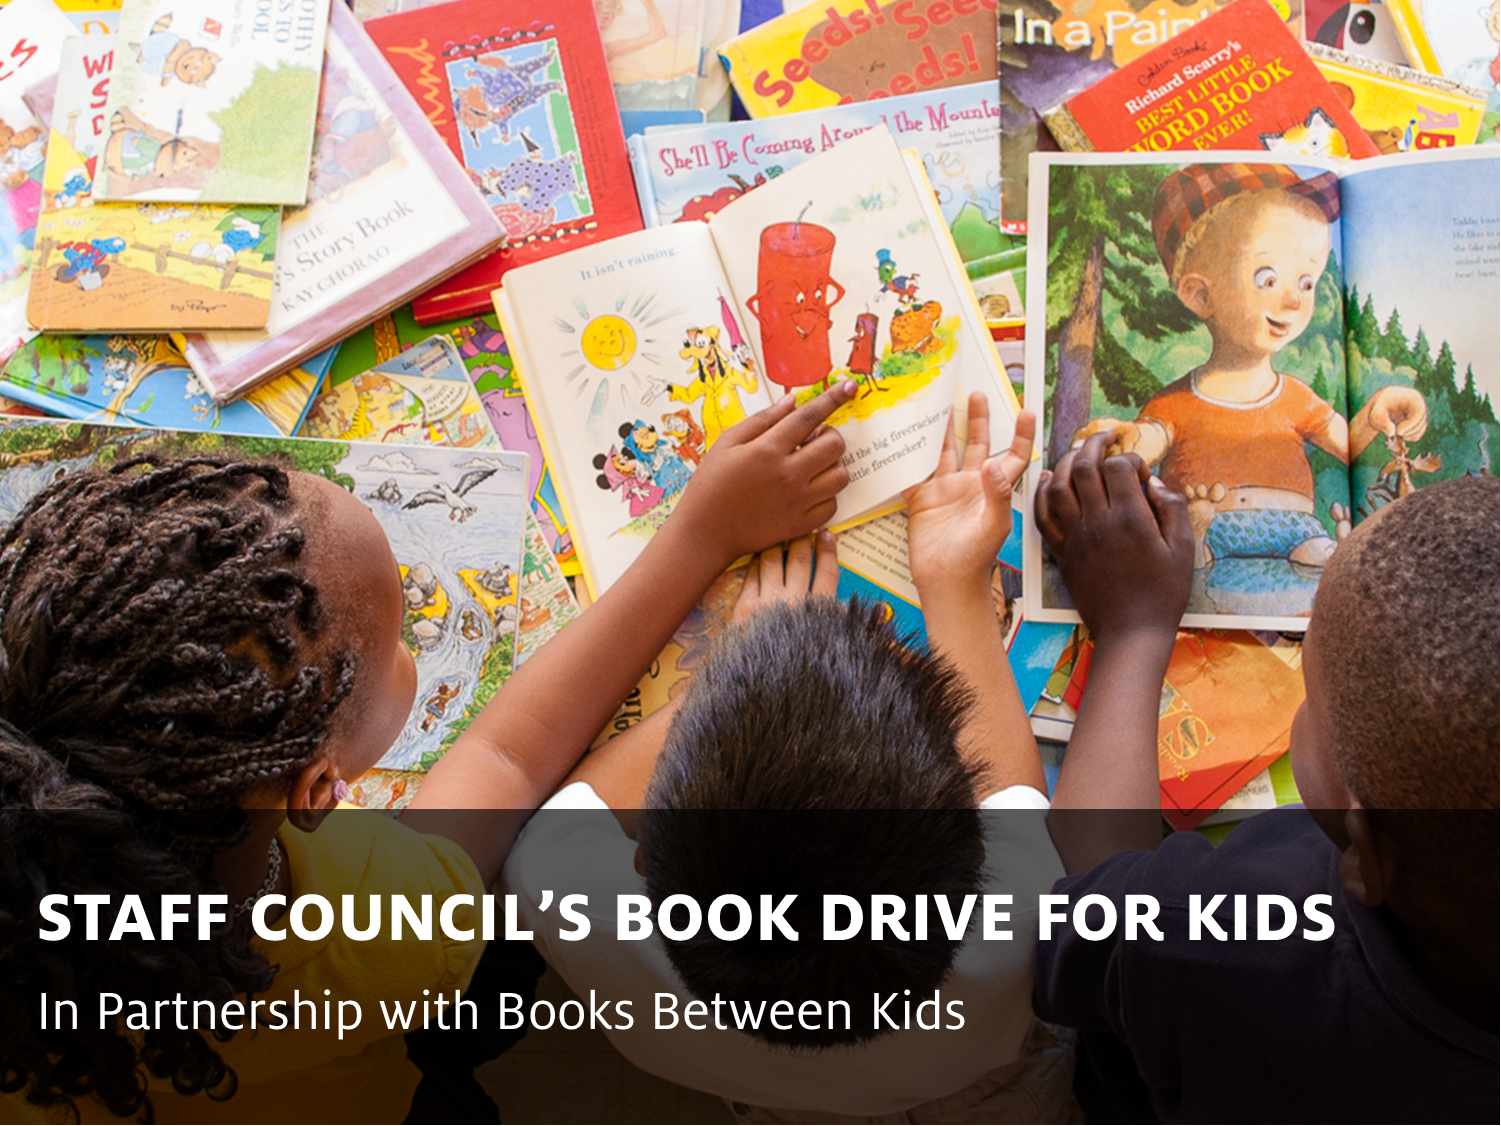 A Book Drive for Kids